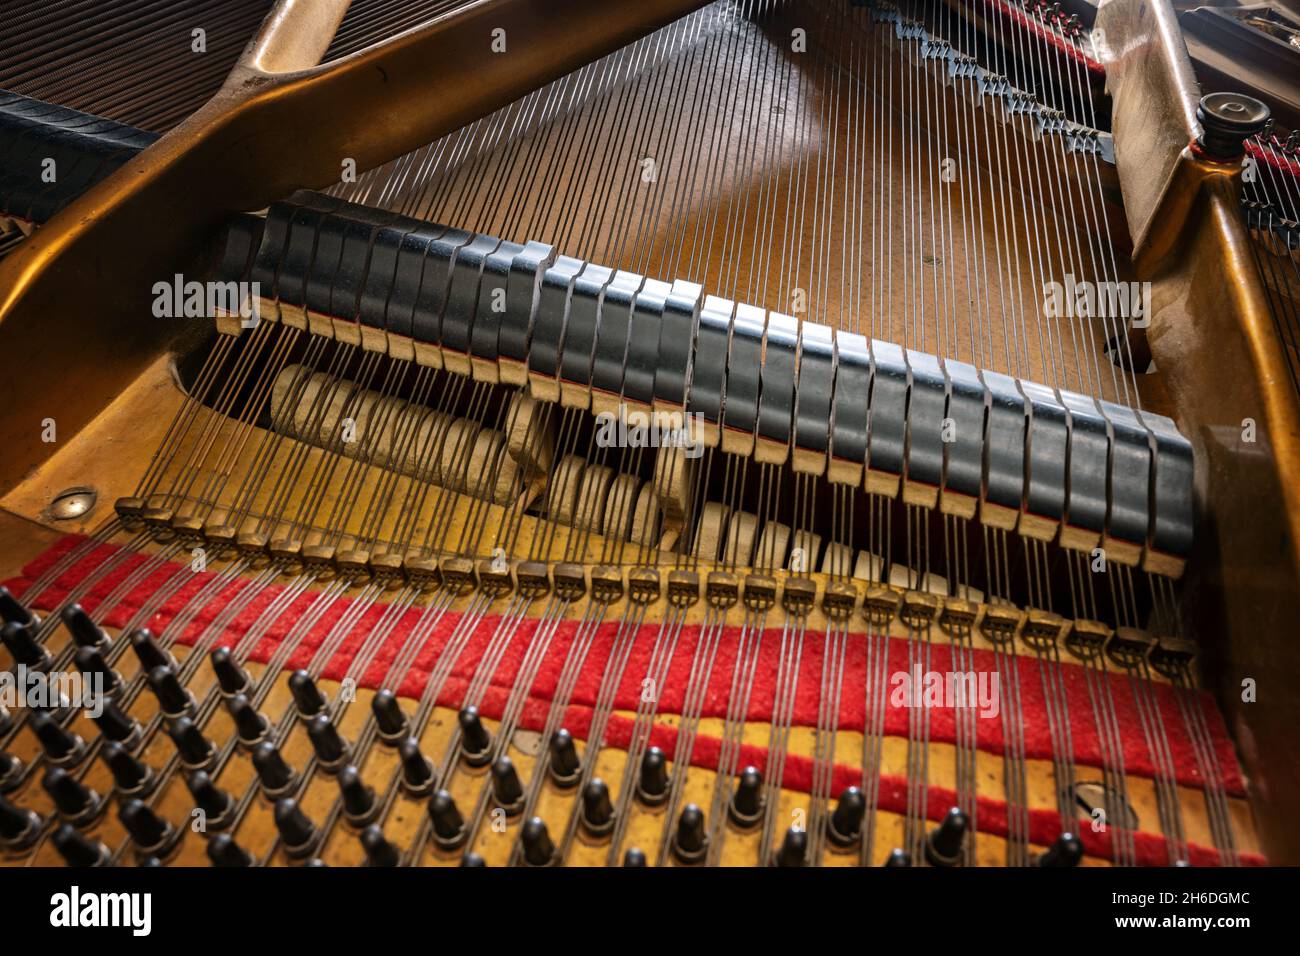 View to hammer and damper on the strings inside an older grand piano, part of the mechanics in the acoustic musical instrument, selected focus, narrow Stock Photo